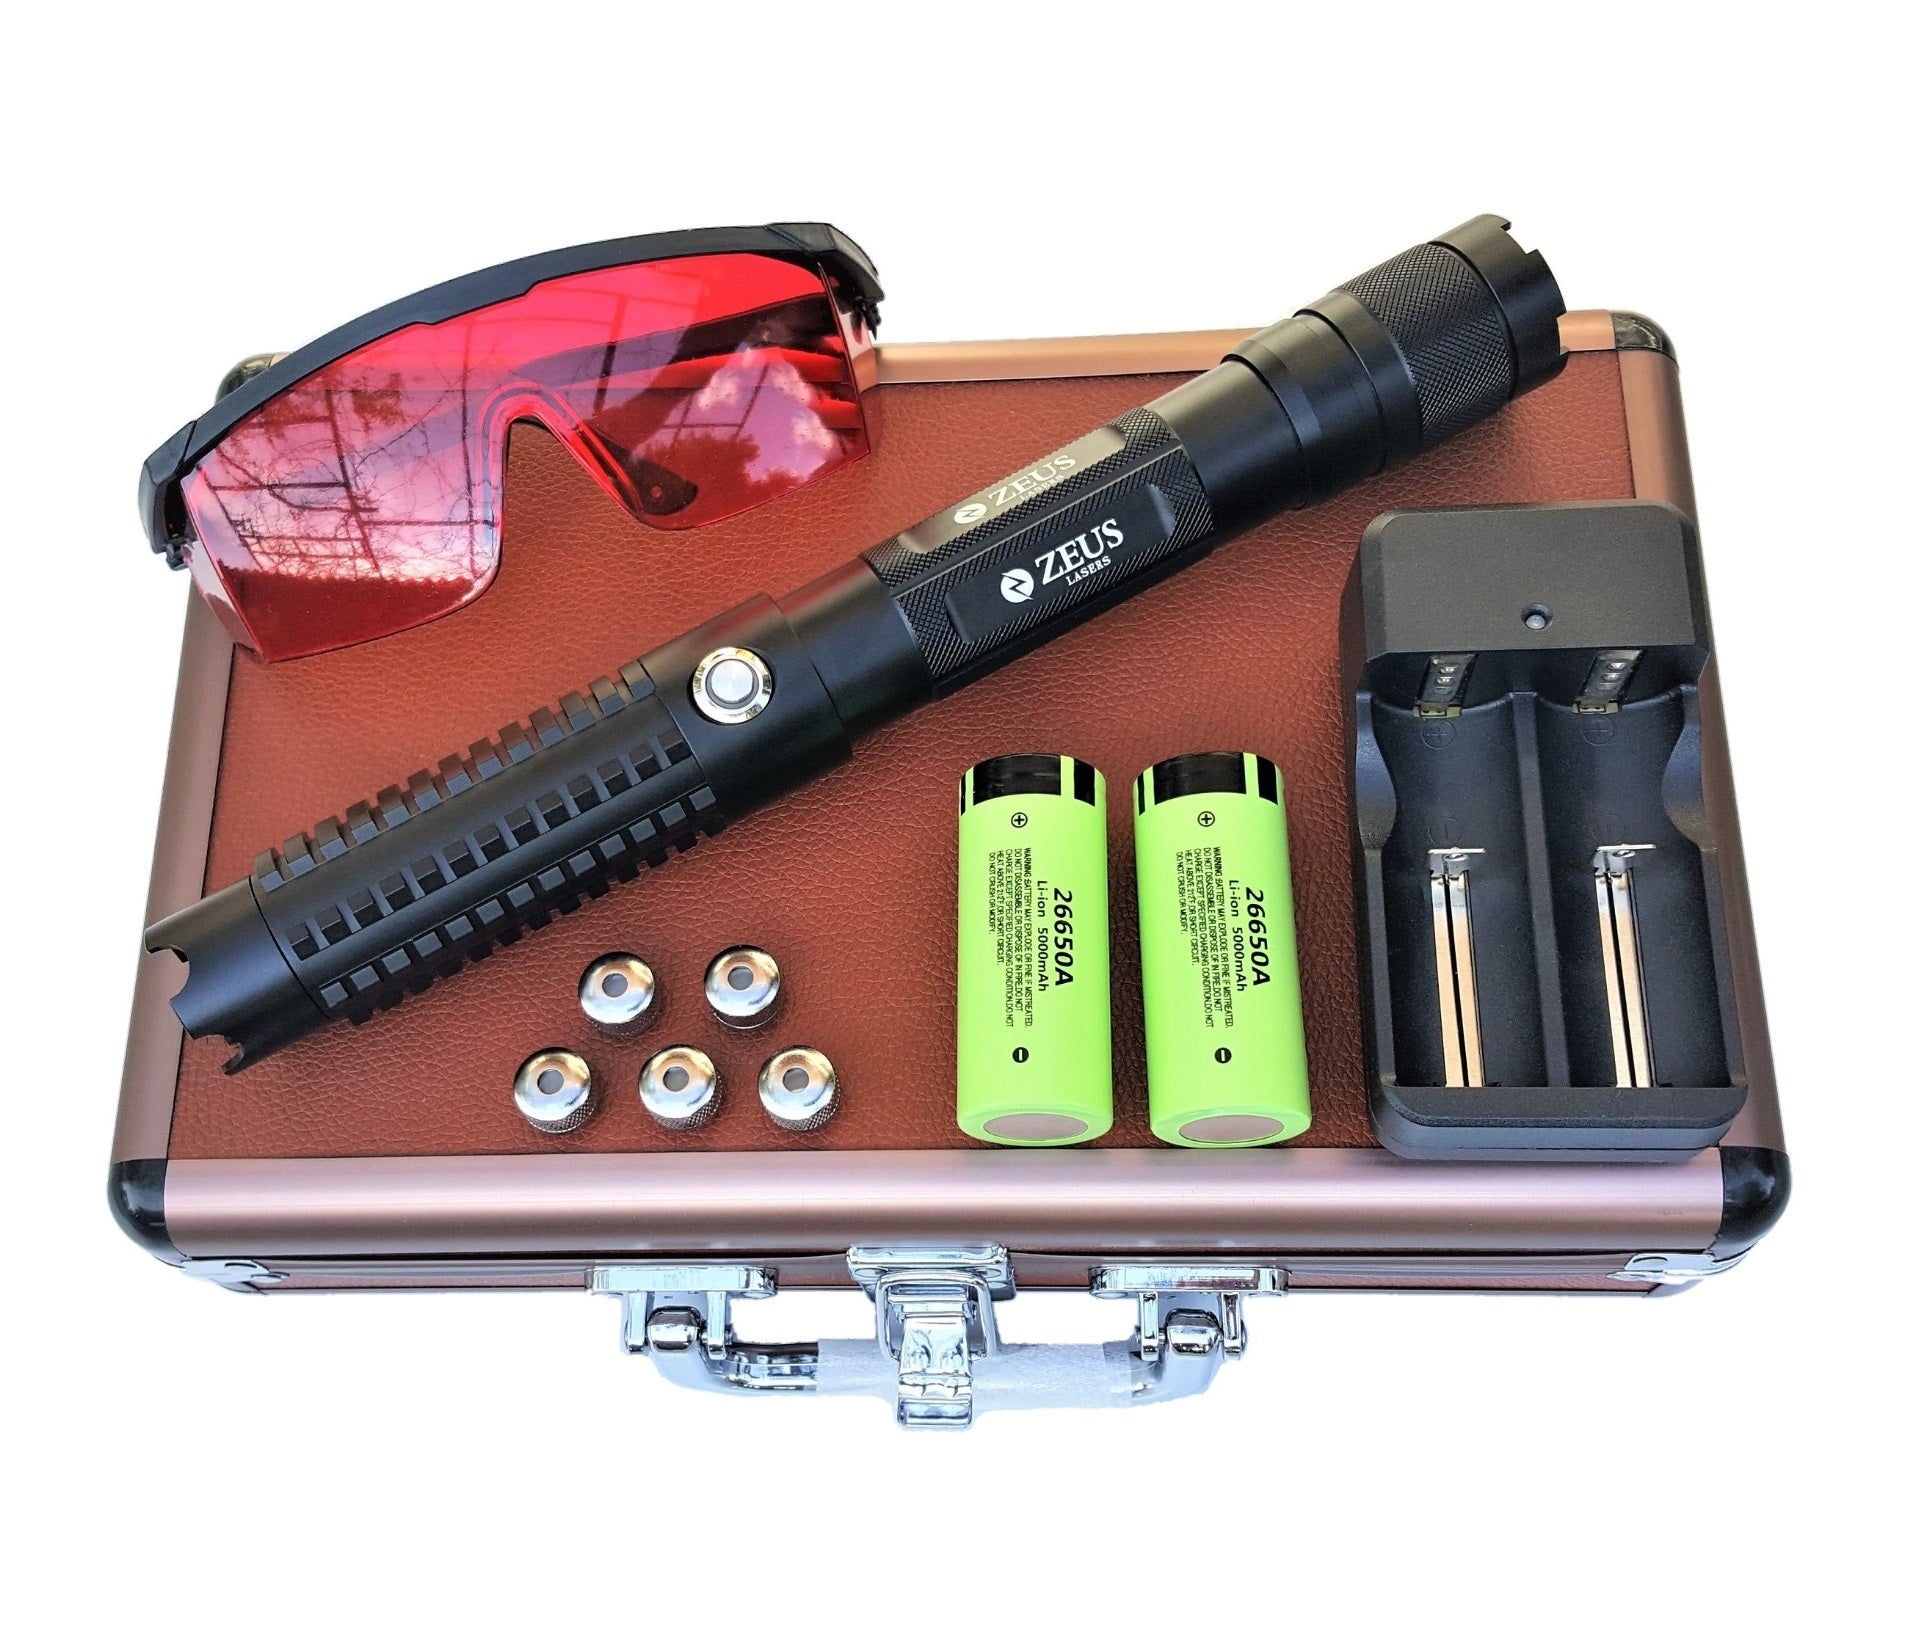 Review: SKYlaser 55 mW Green Laser Pointer - Universe Today